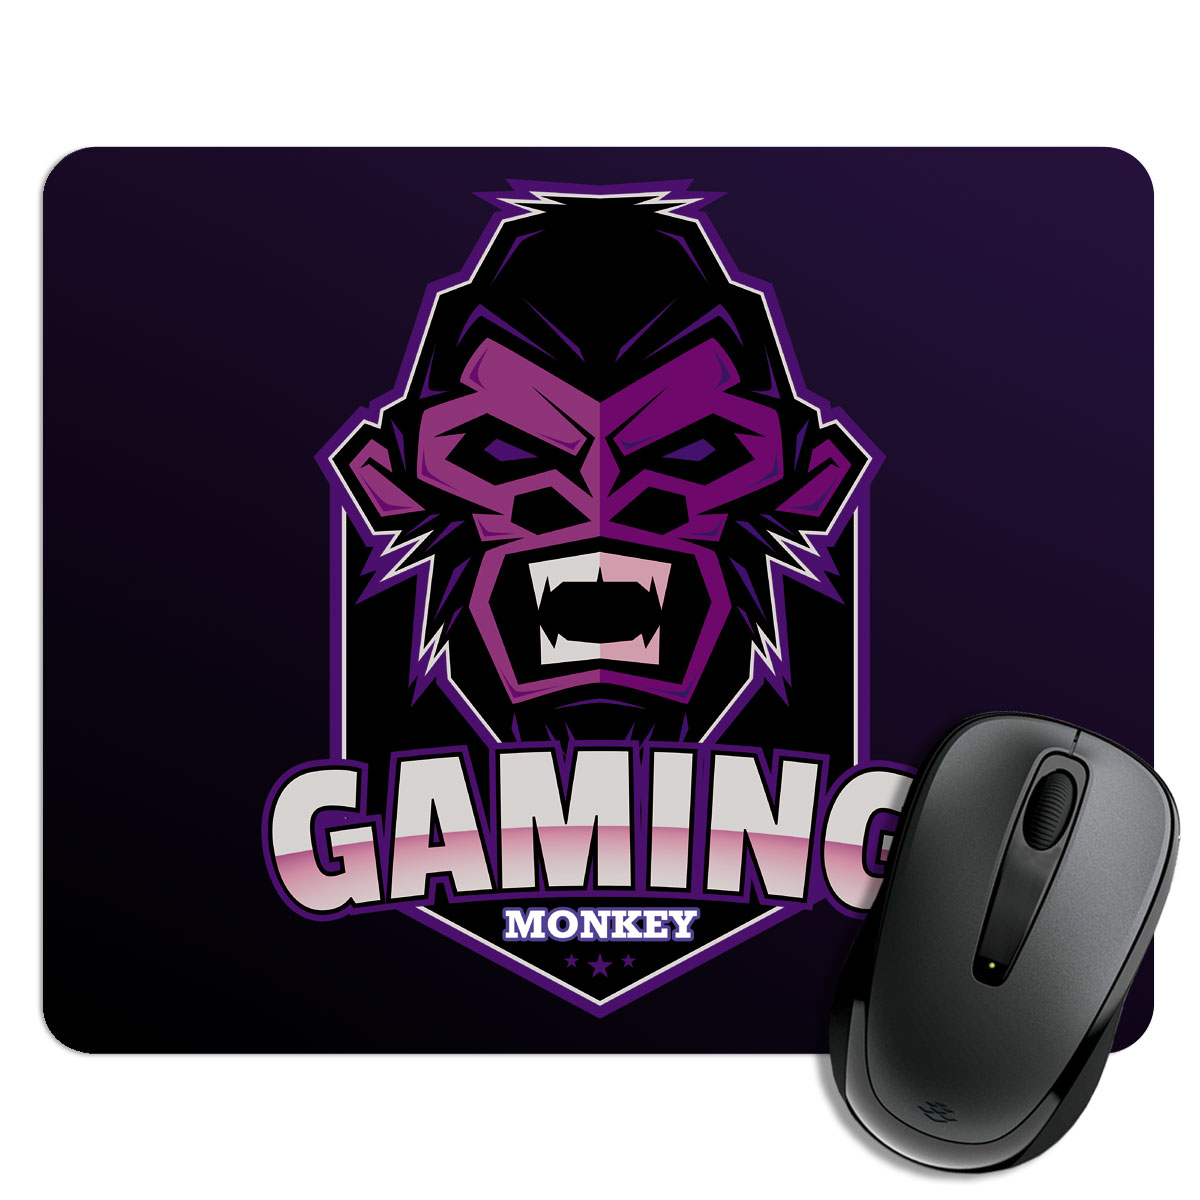 Gaming Monkey Mouse Pad